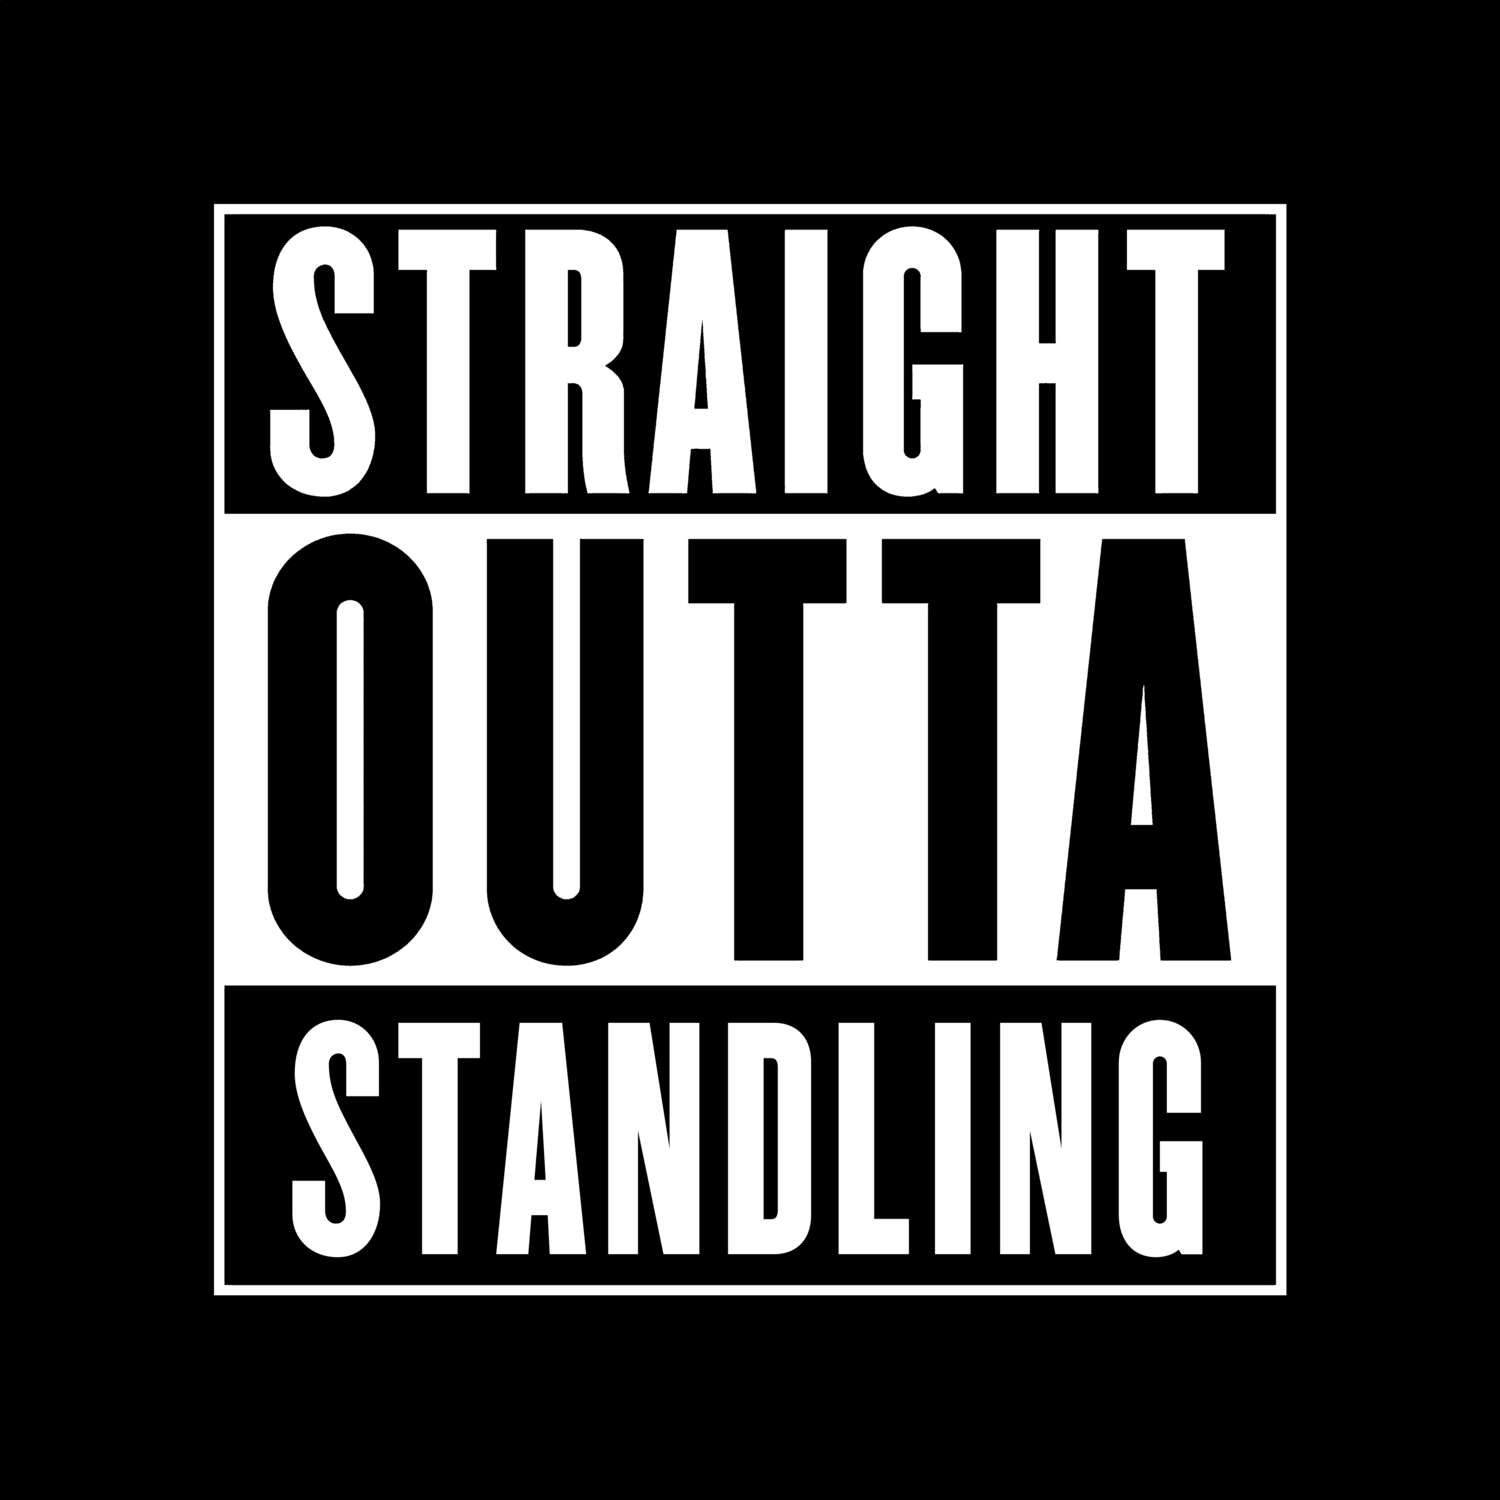 Standling T-Shirt »Straight Outta«